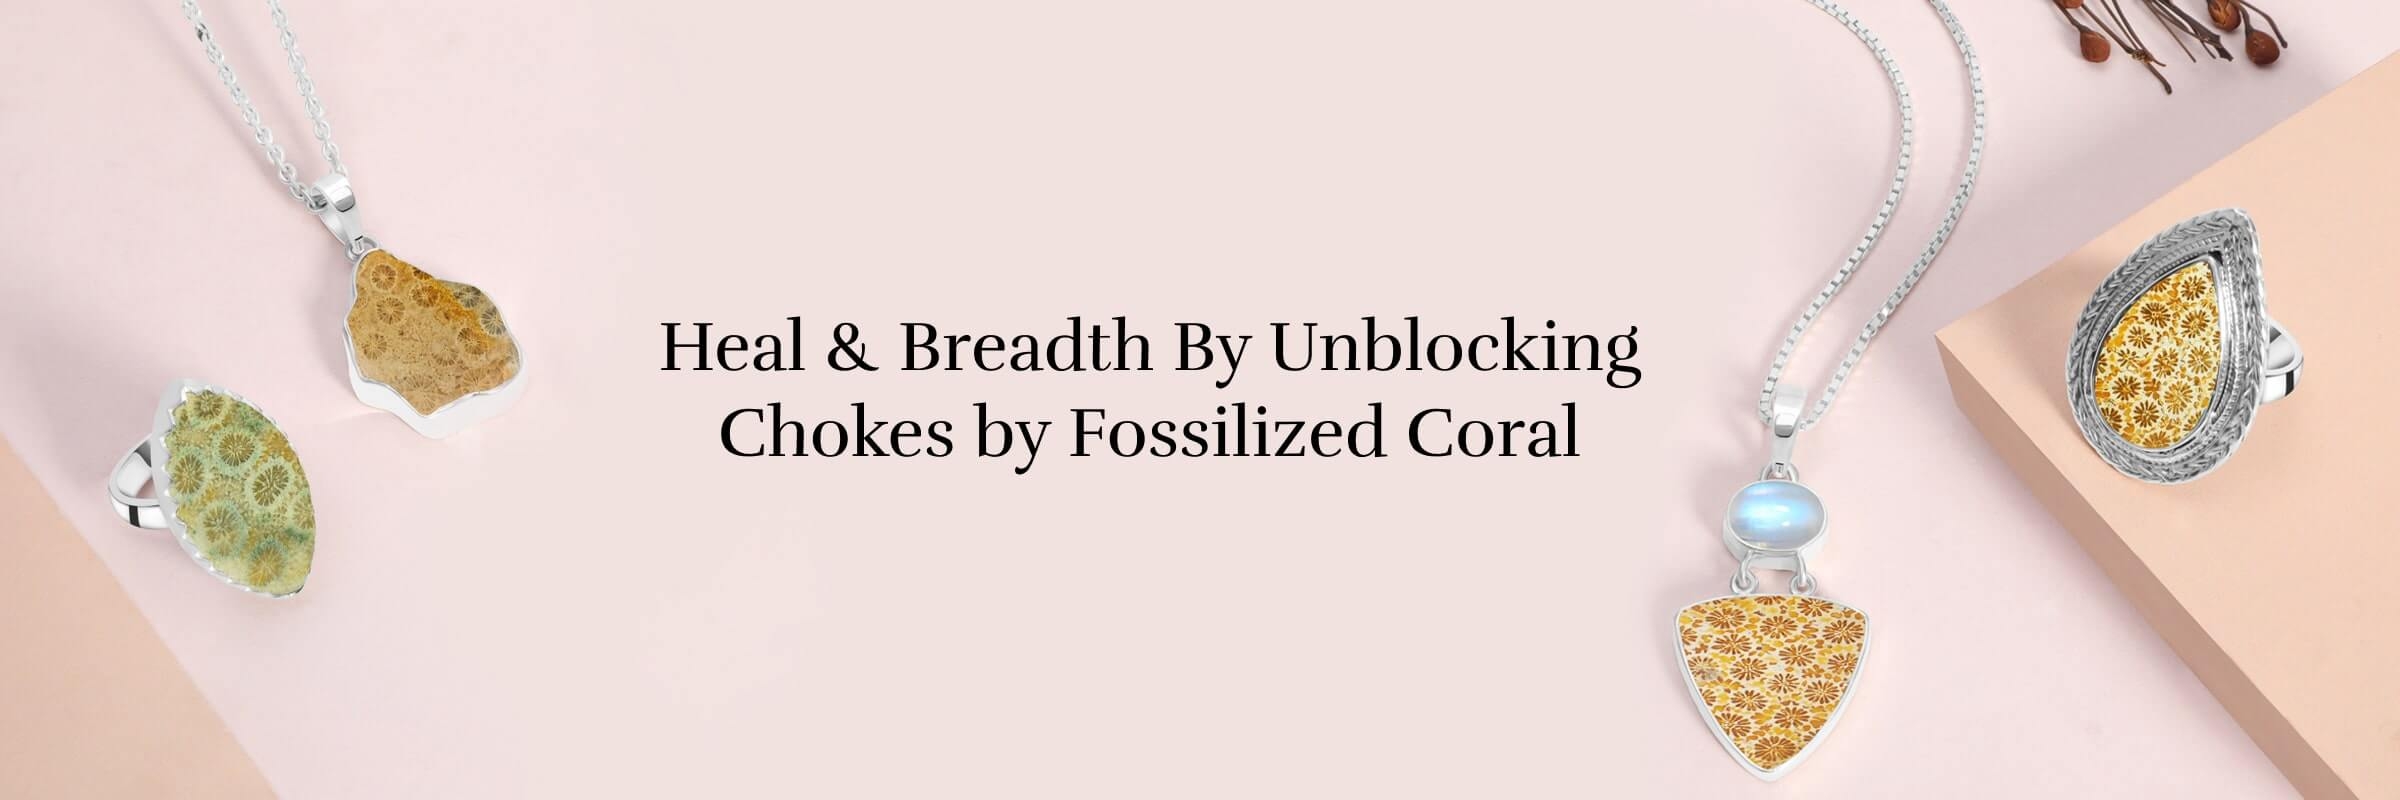 Overcome From both Physical and Mental Dysfunctions with Fossilized Coral Rings